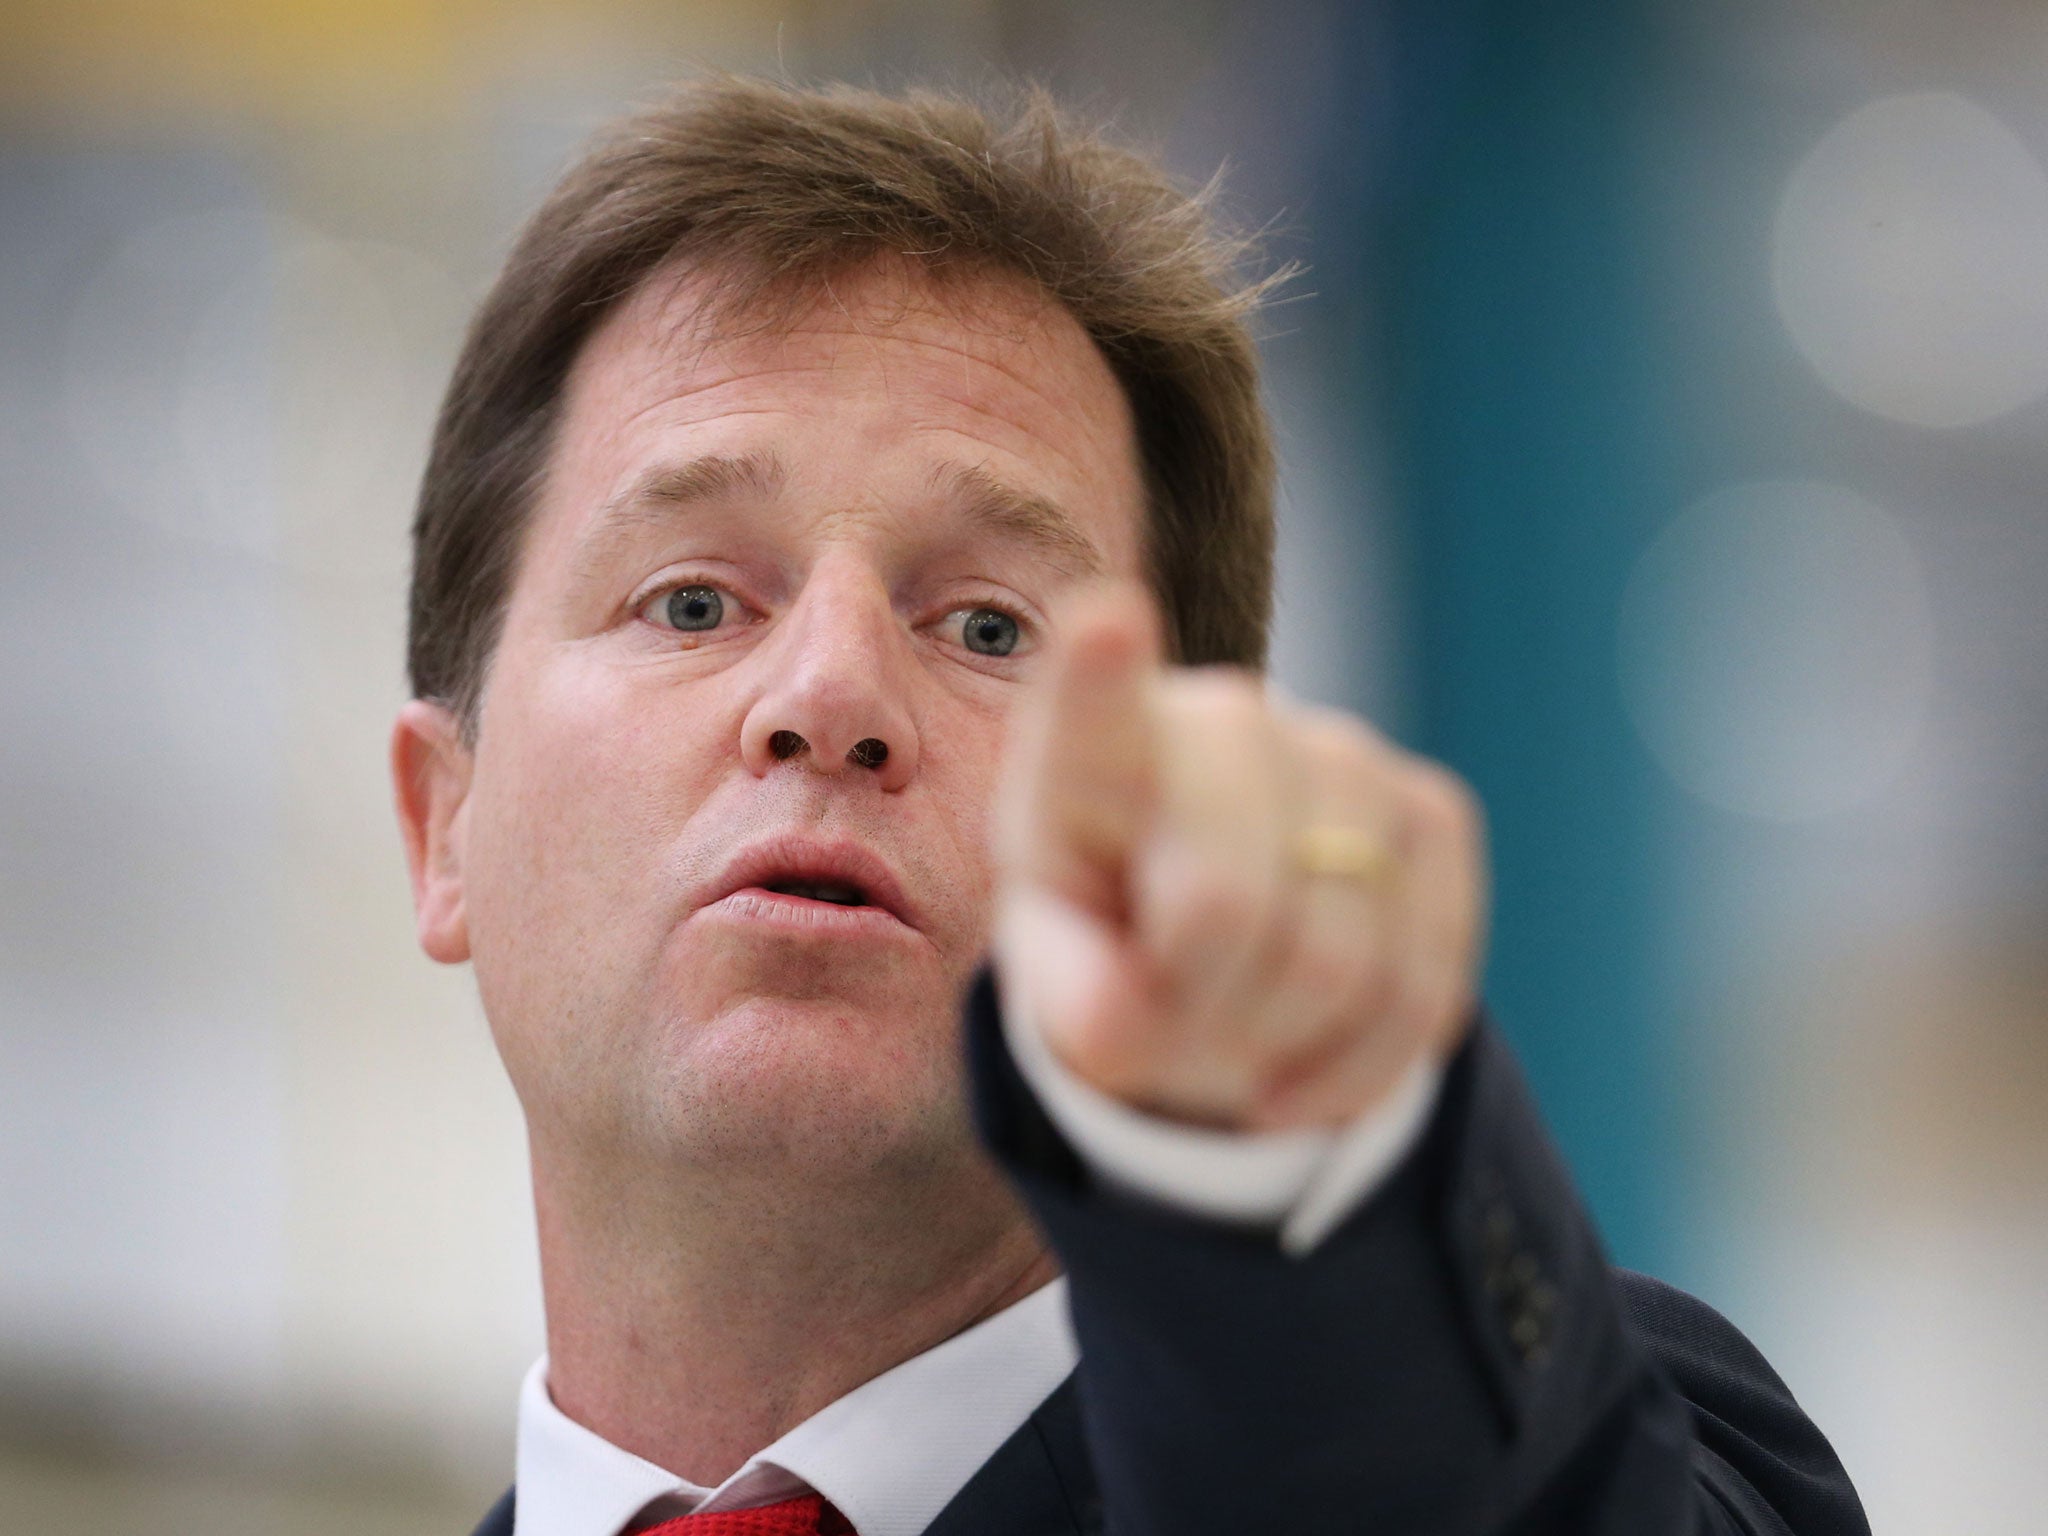 Deputy Prime Minister Nick Clegg has responded to London Mayor Boris Johnson who implied he was the Prime Minister's condom